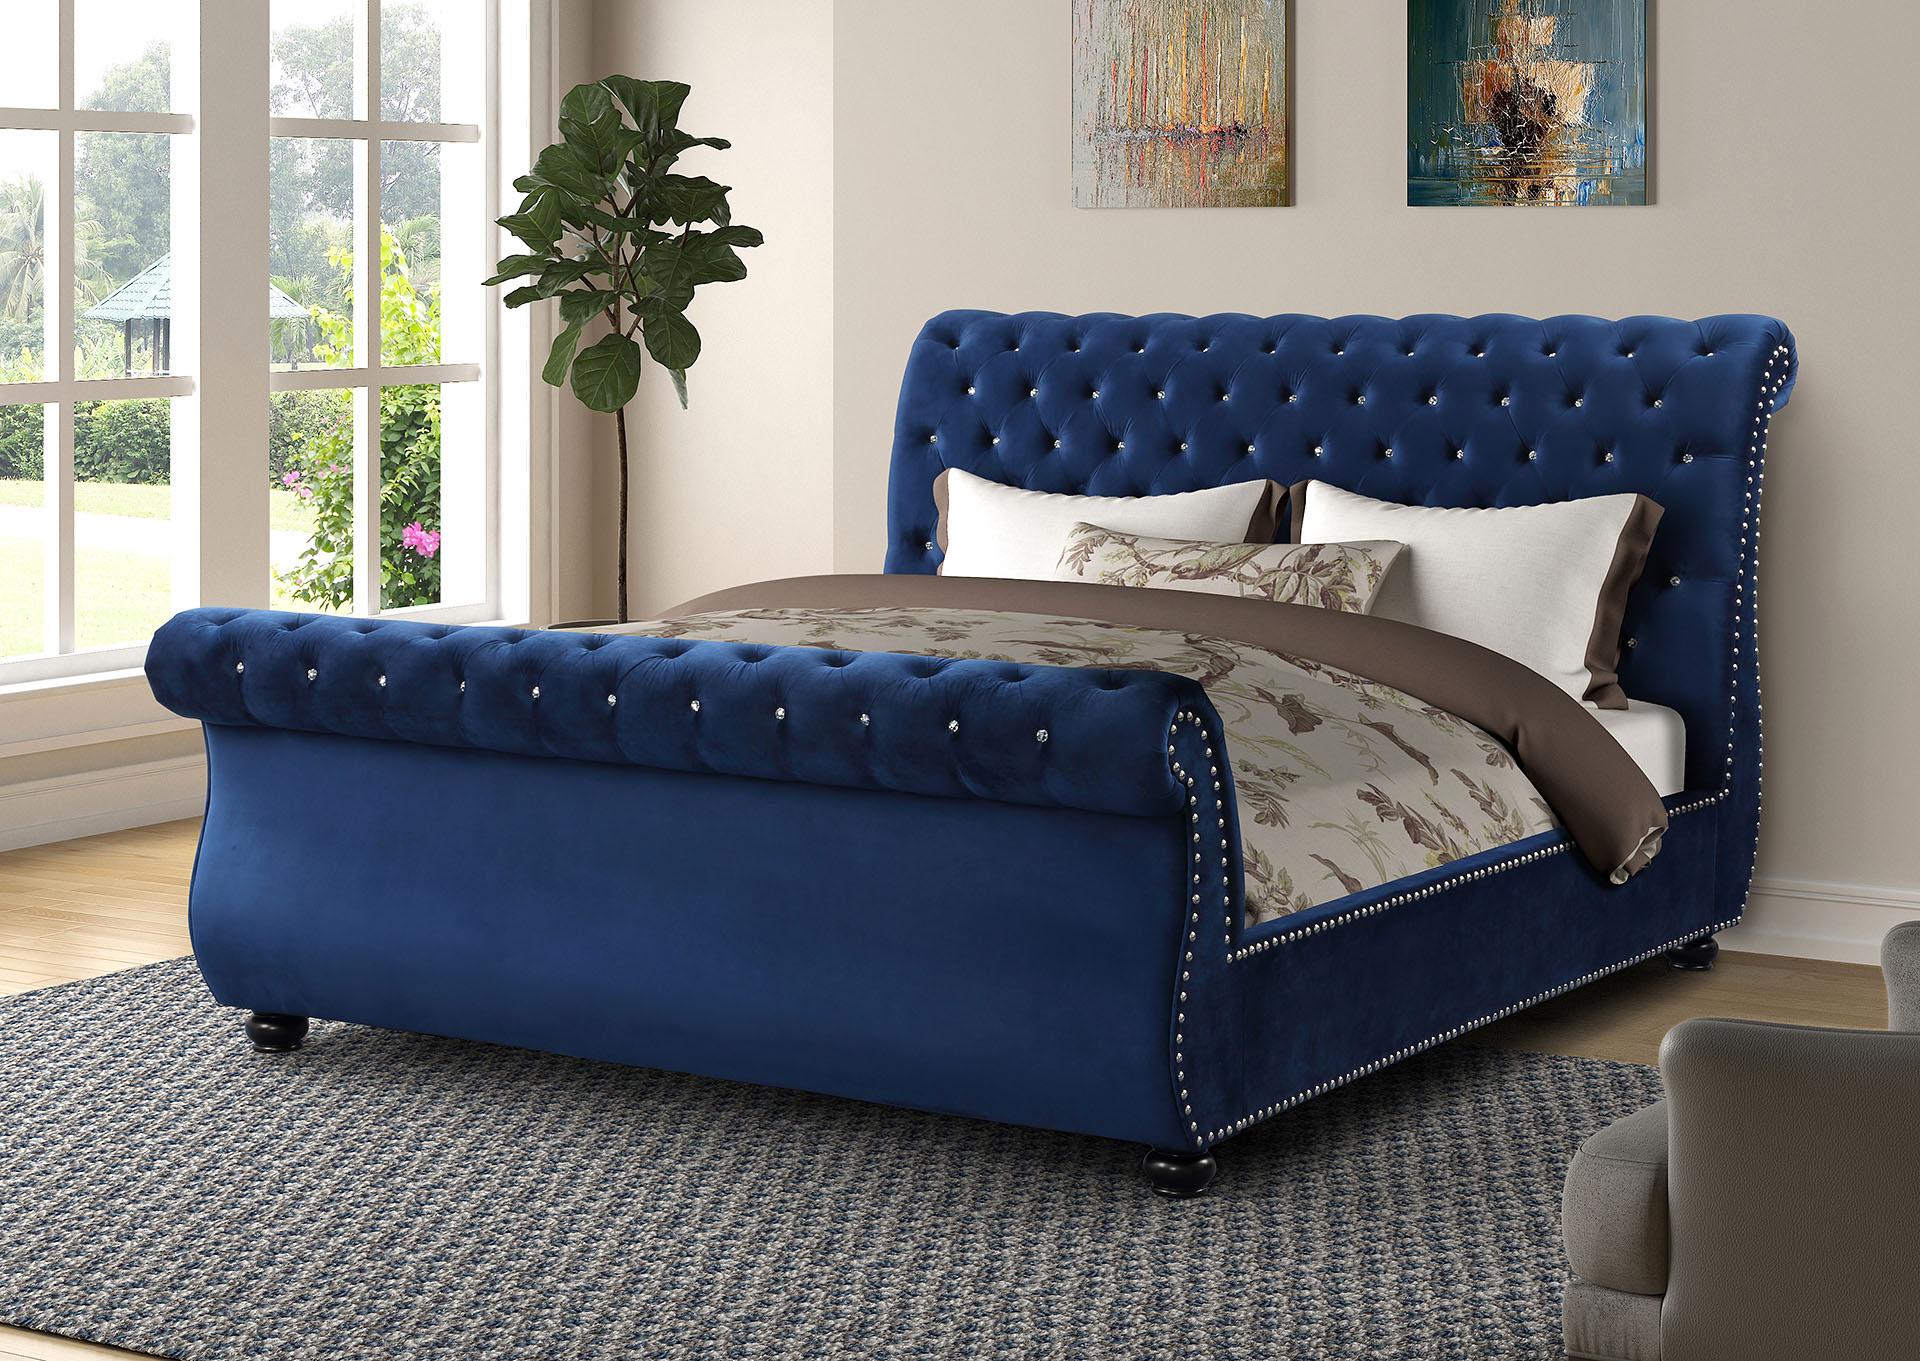 

    
Blue Velvet Crystal Tufted Queen Bed Set 4Pcs KENDALL Galaxy Home Contemporary
